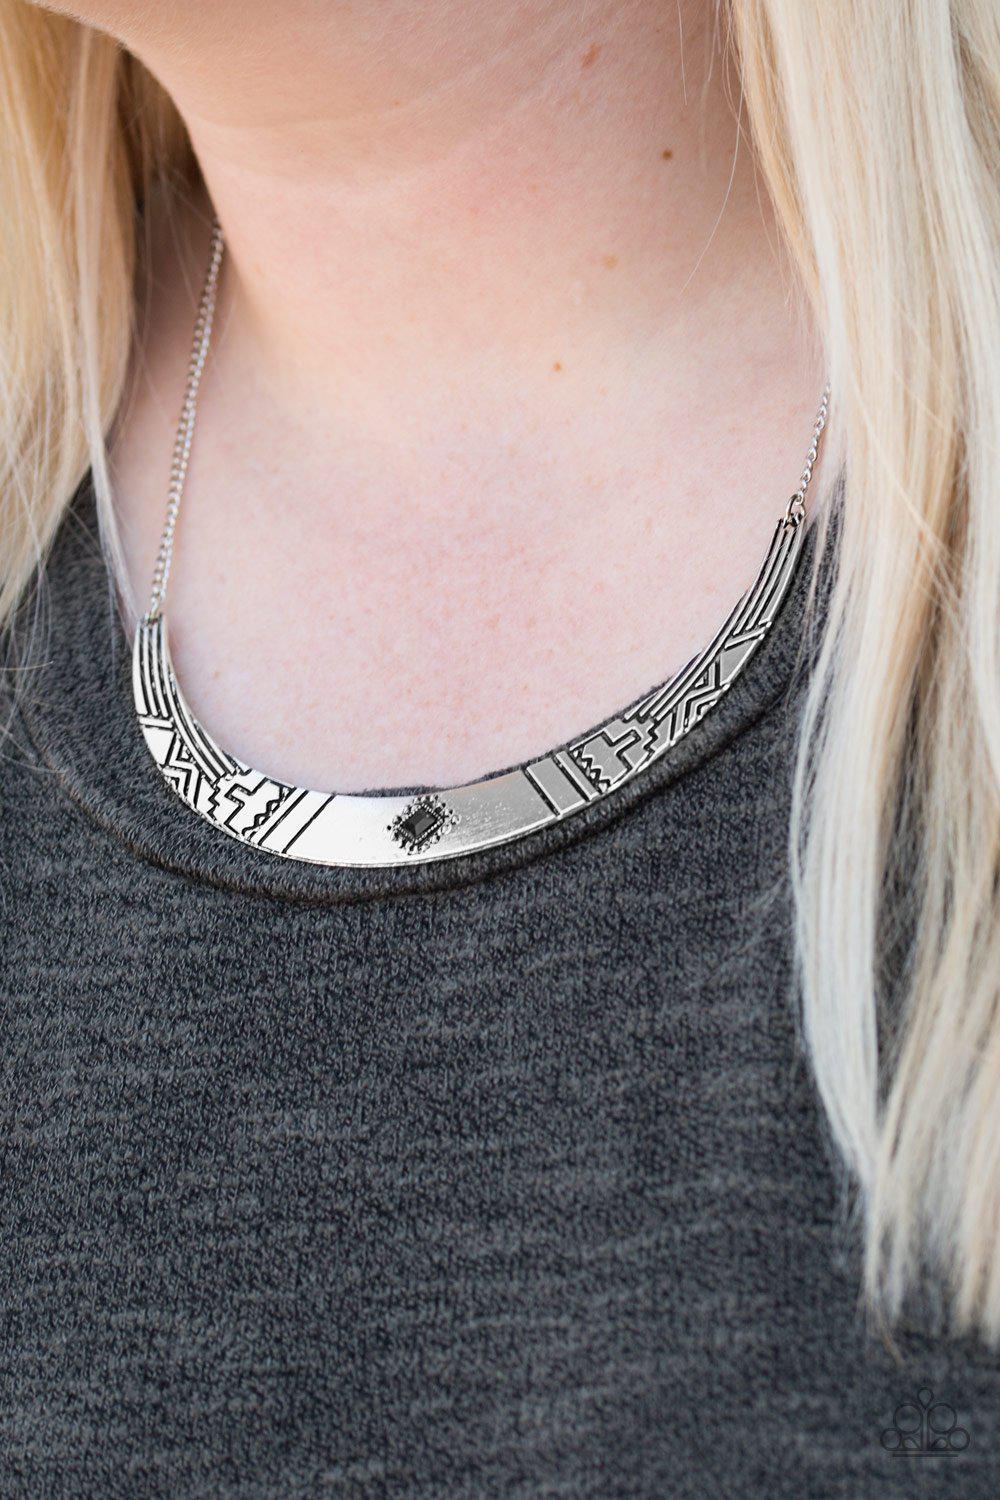 Arizona Adventure Silver and Black Necklace - Paparazzi Accessories-CarasShop.com - $5 Jewelry by Cara Jewels